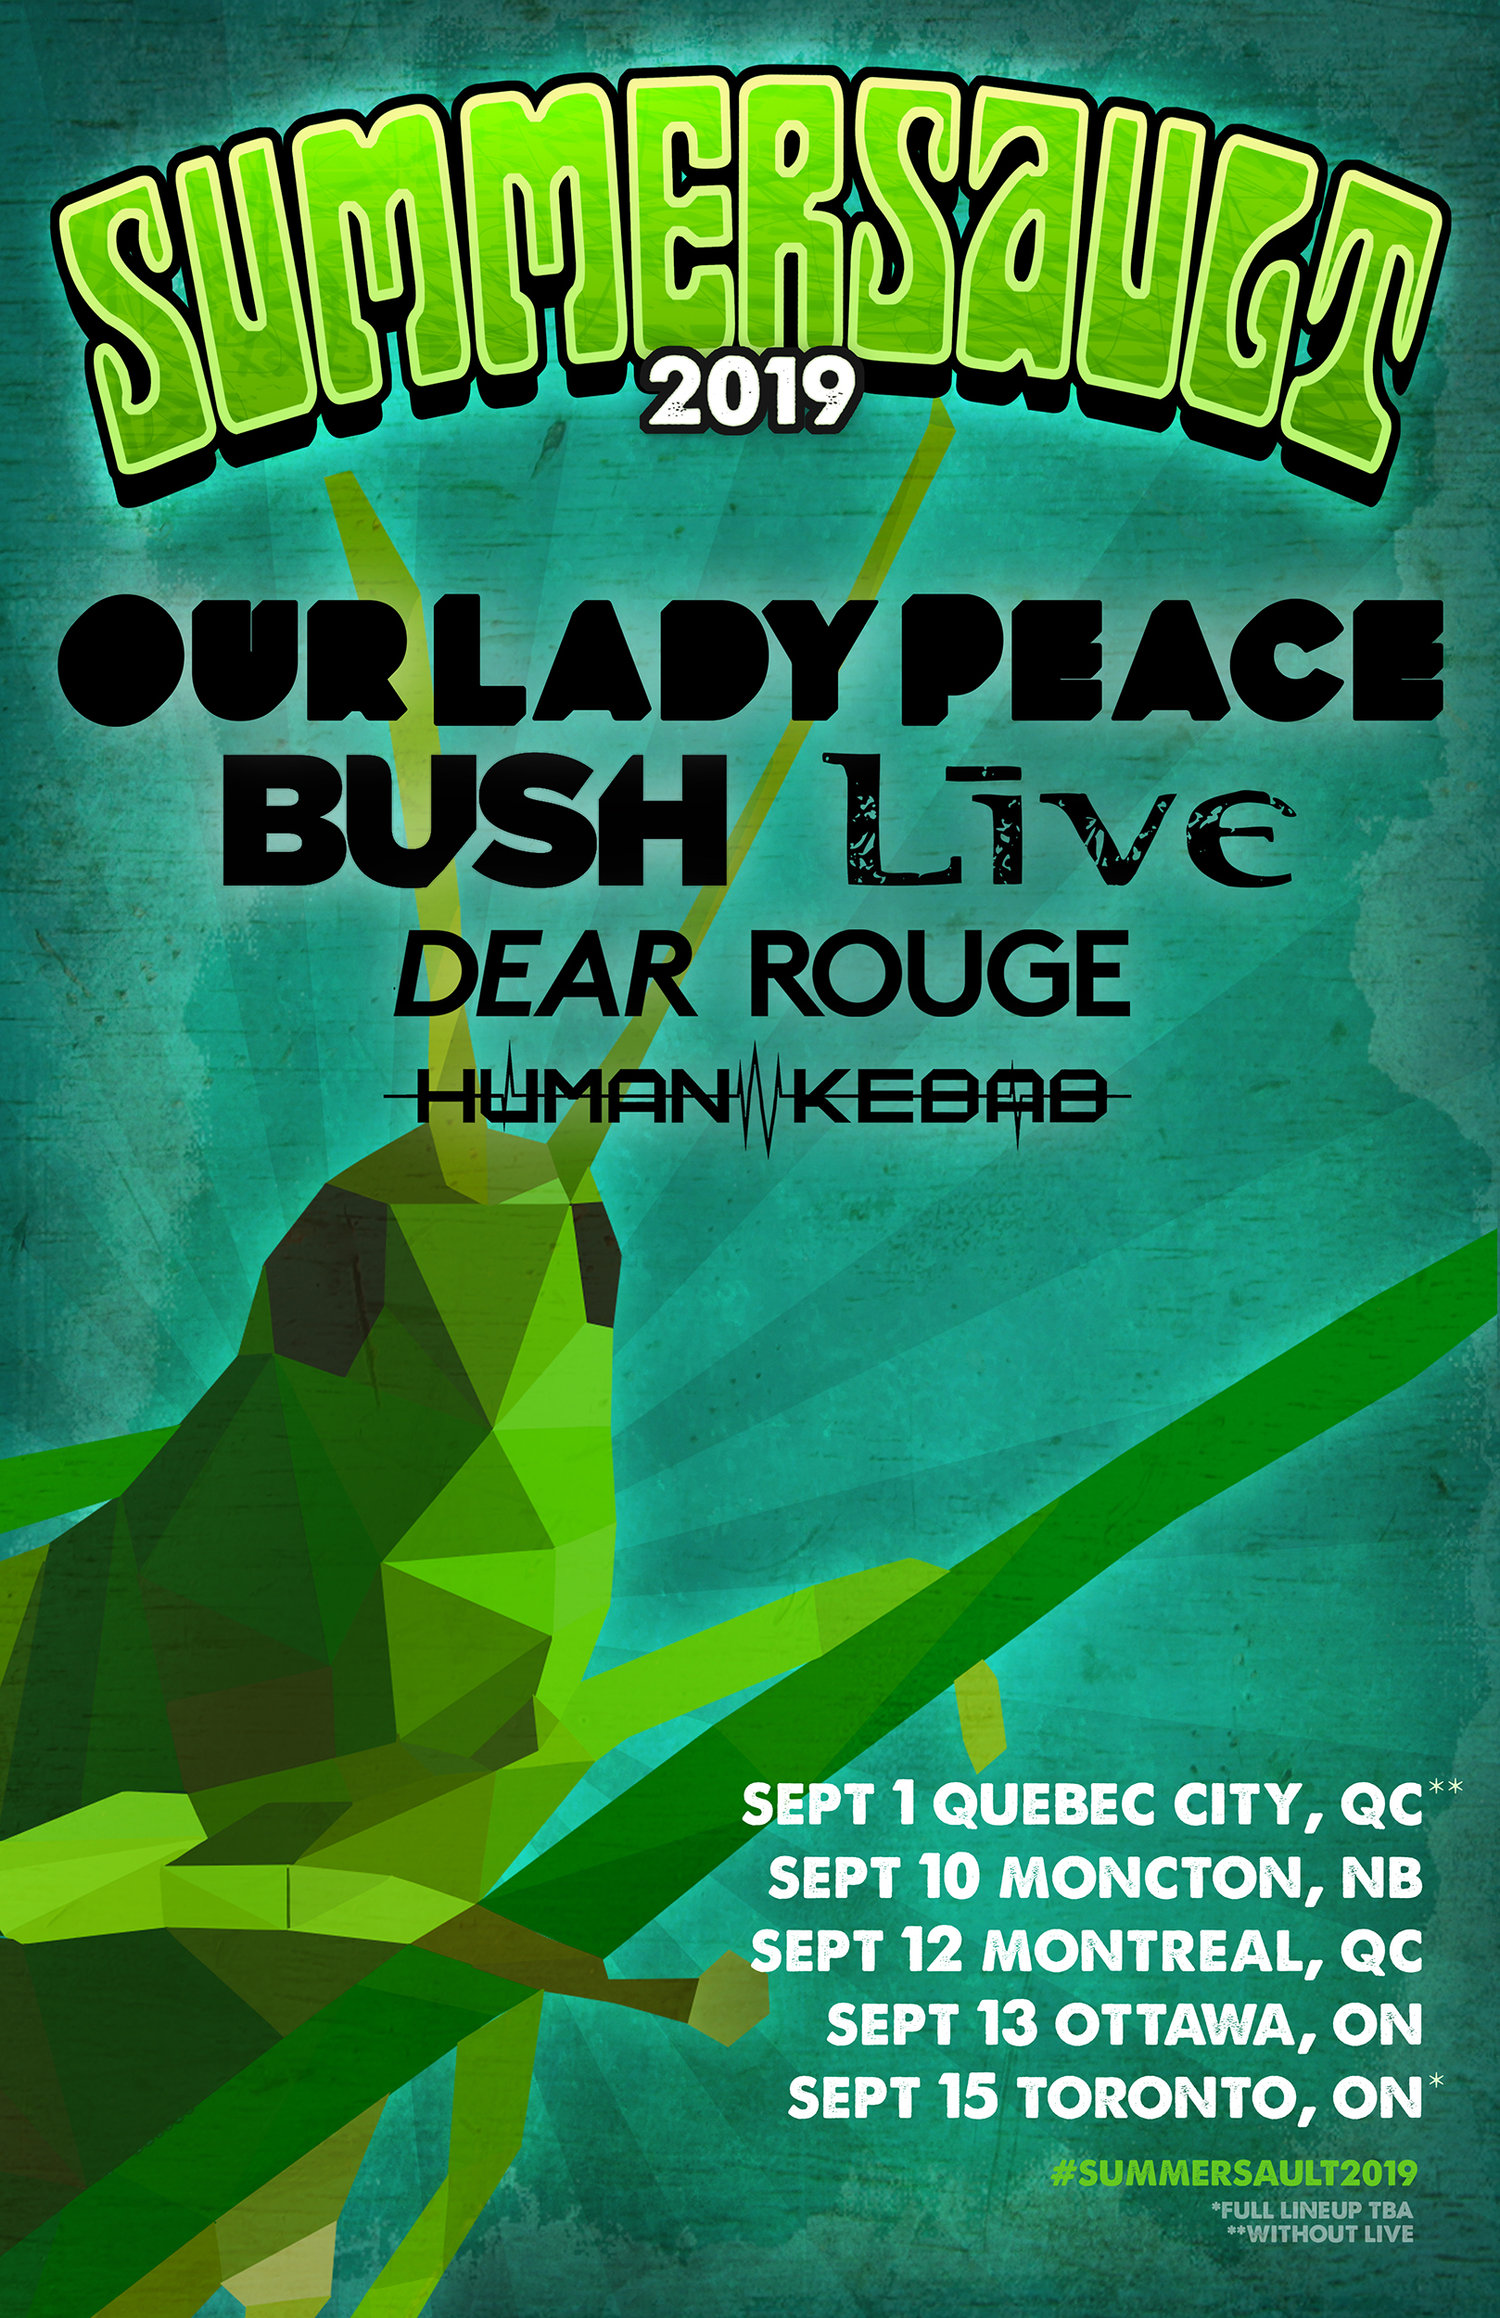 Our Lady Peace To Perform With Bush And Live On Massive North American